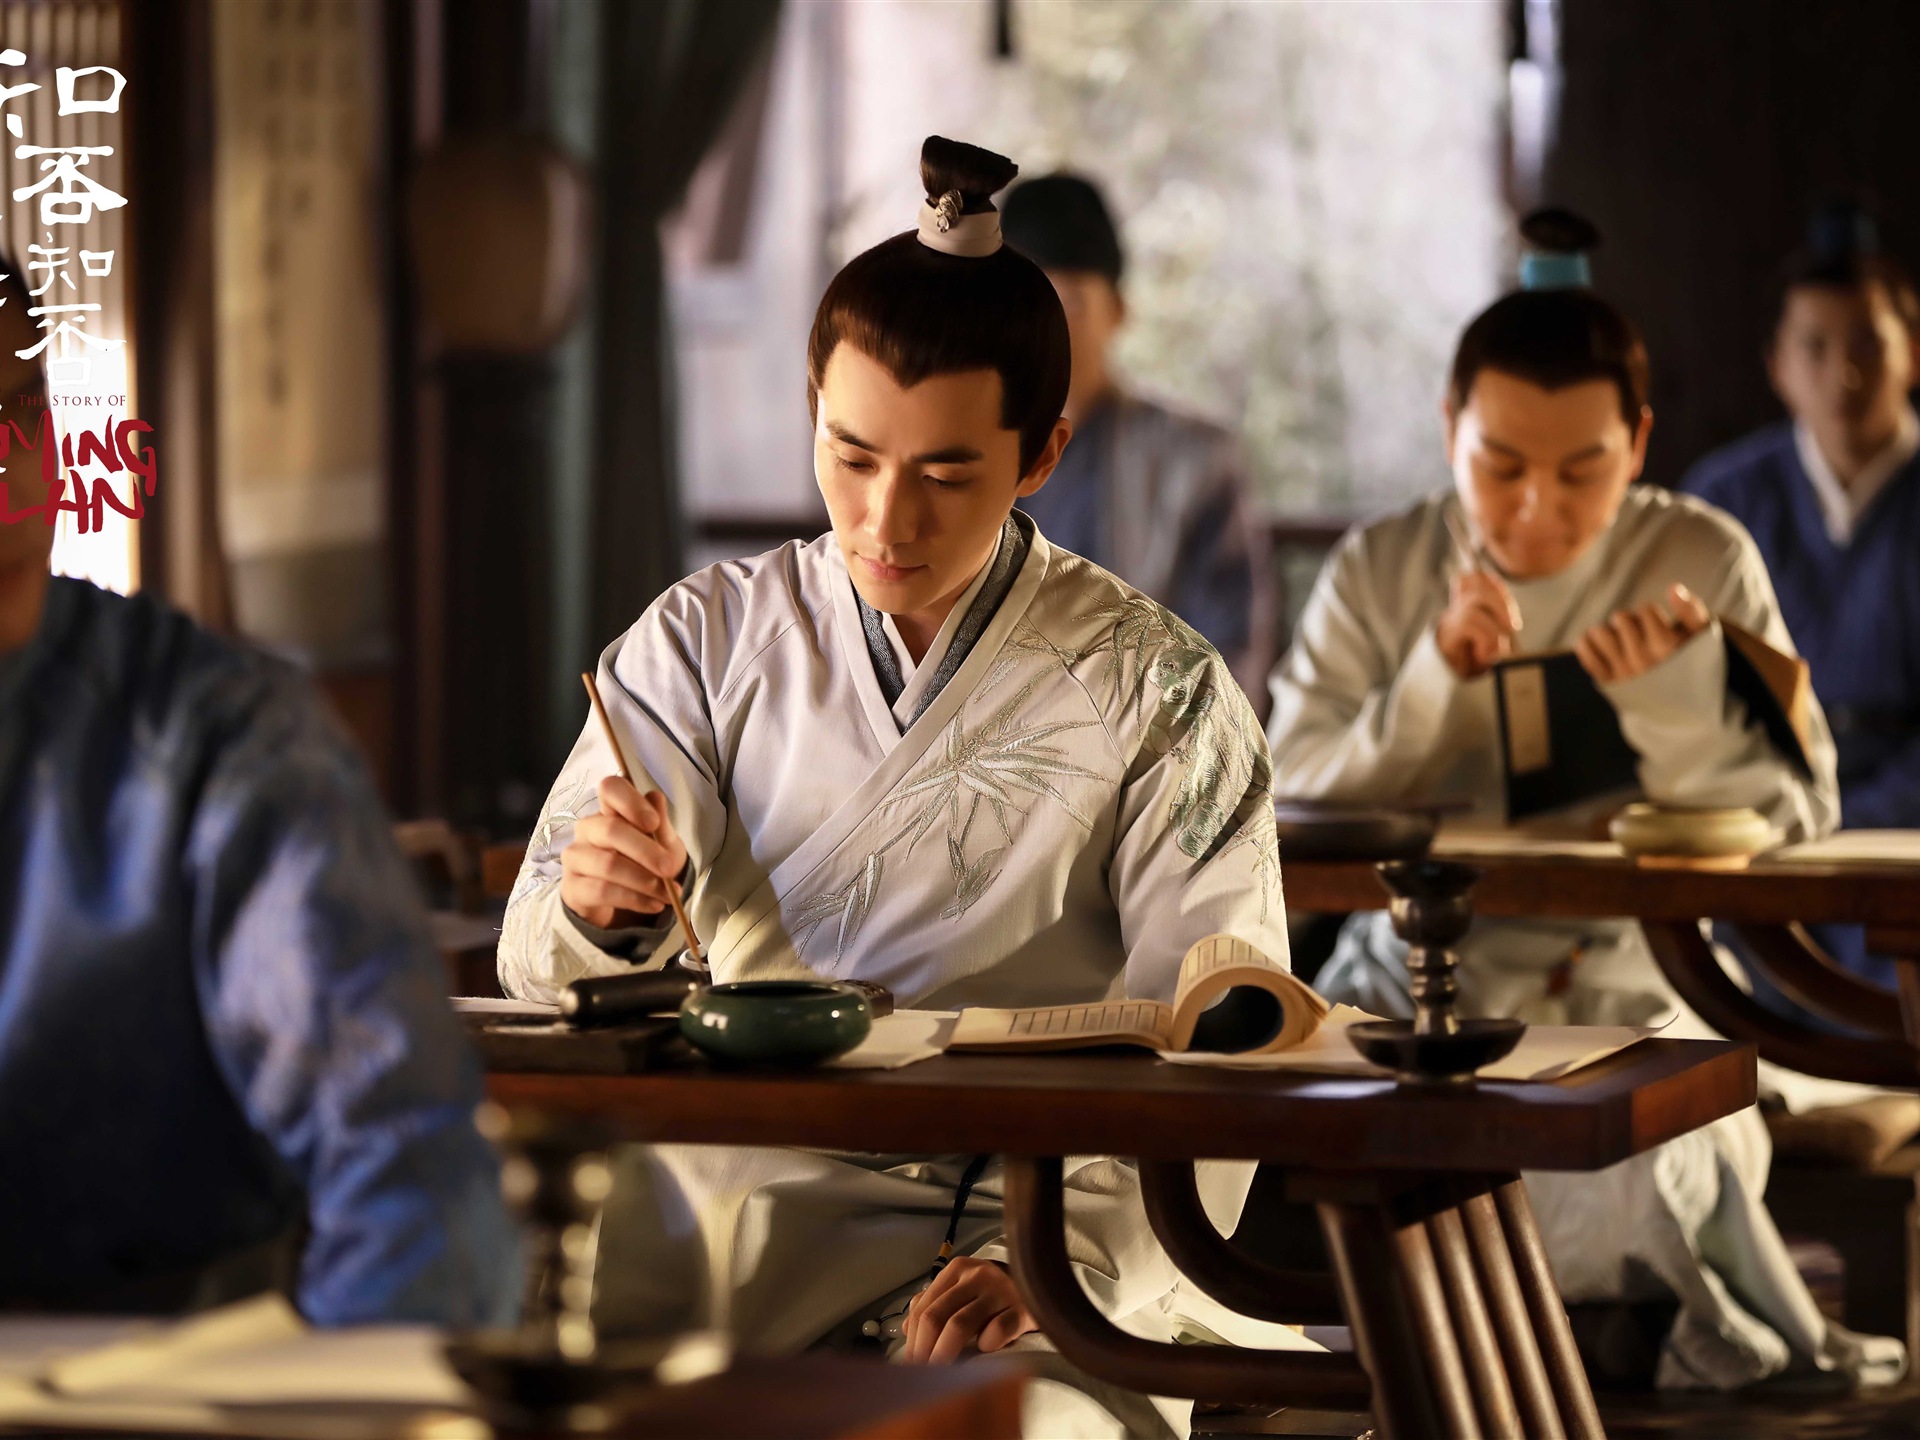 The Story Of MingLan, TV series HD wallpapers #37 - 1920x1440